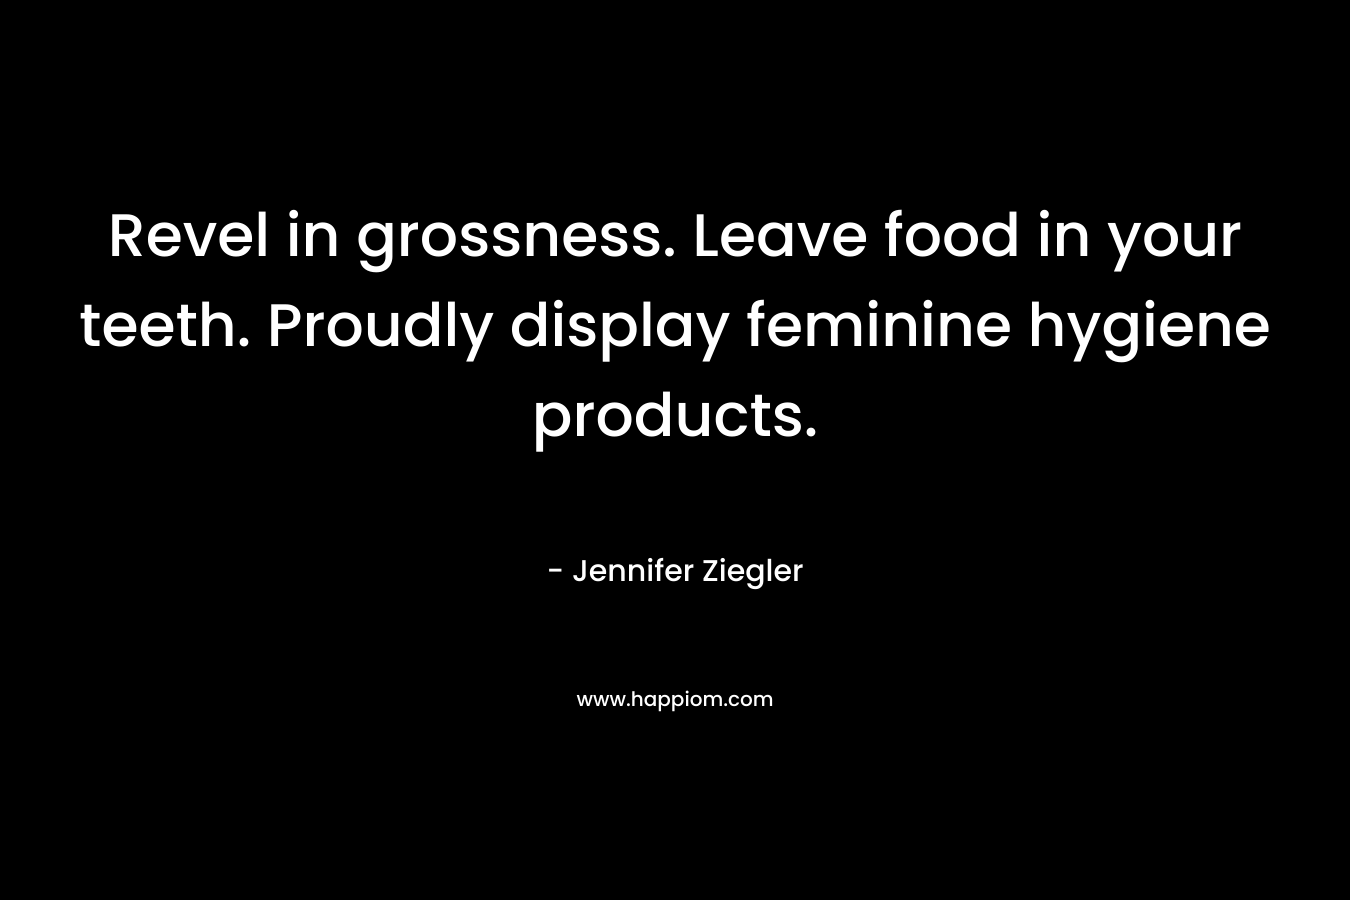 Revel in grossness. Leave food in your teeth. Proudly display feminine hygiene products.